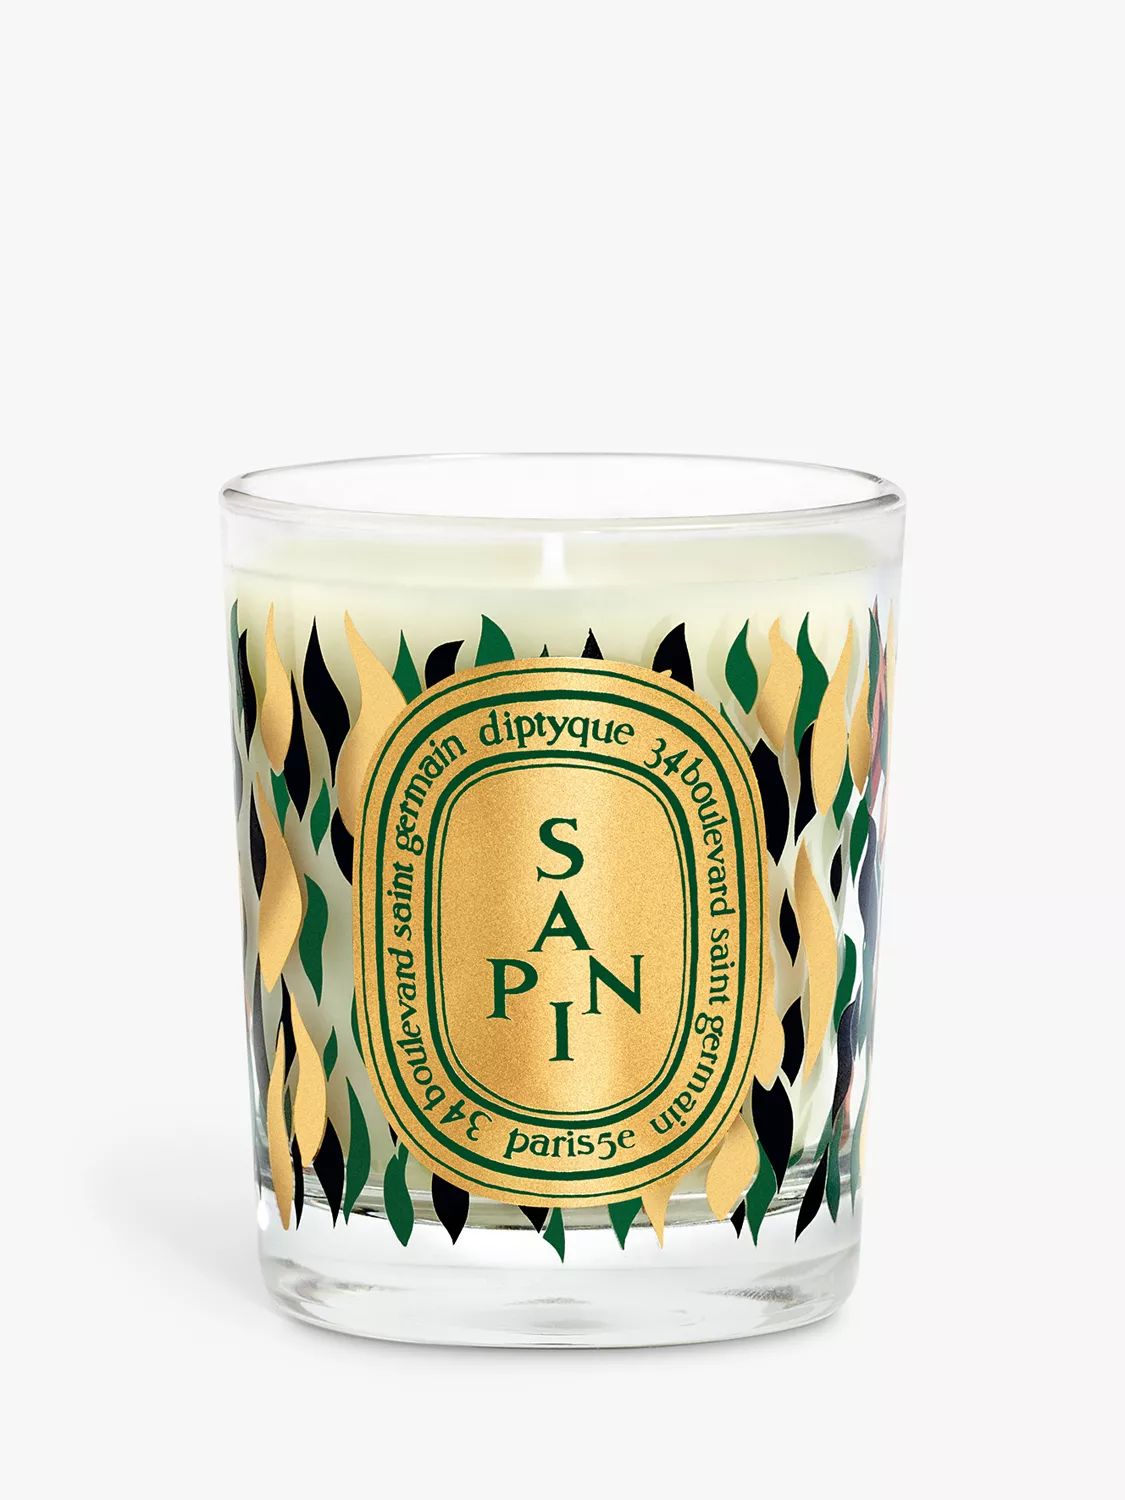 Diptyque Sapin Limited Edition Scented Candle, 70g | John Lewis (UK)